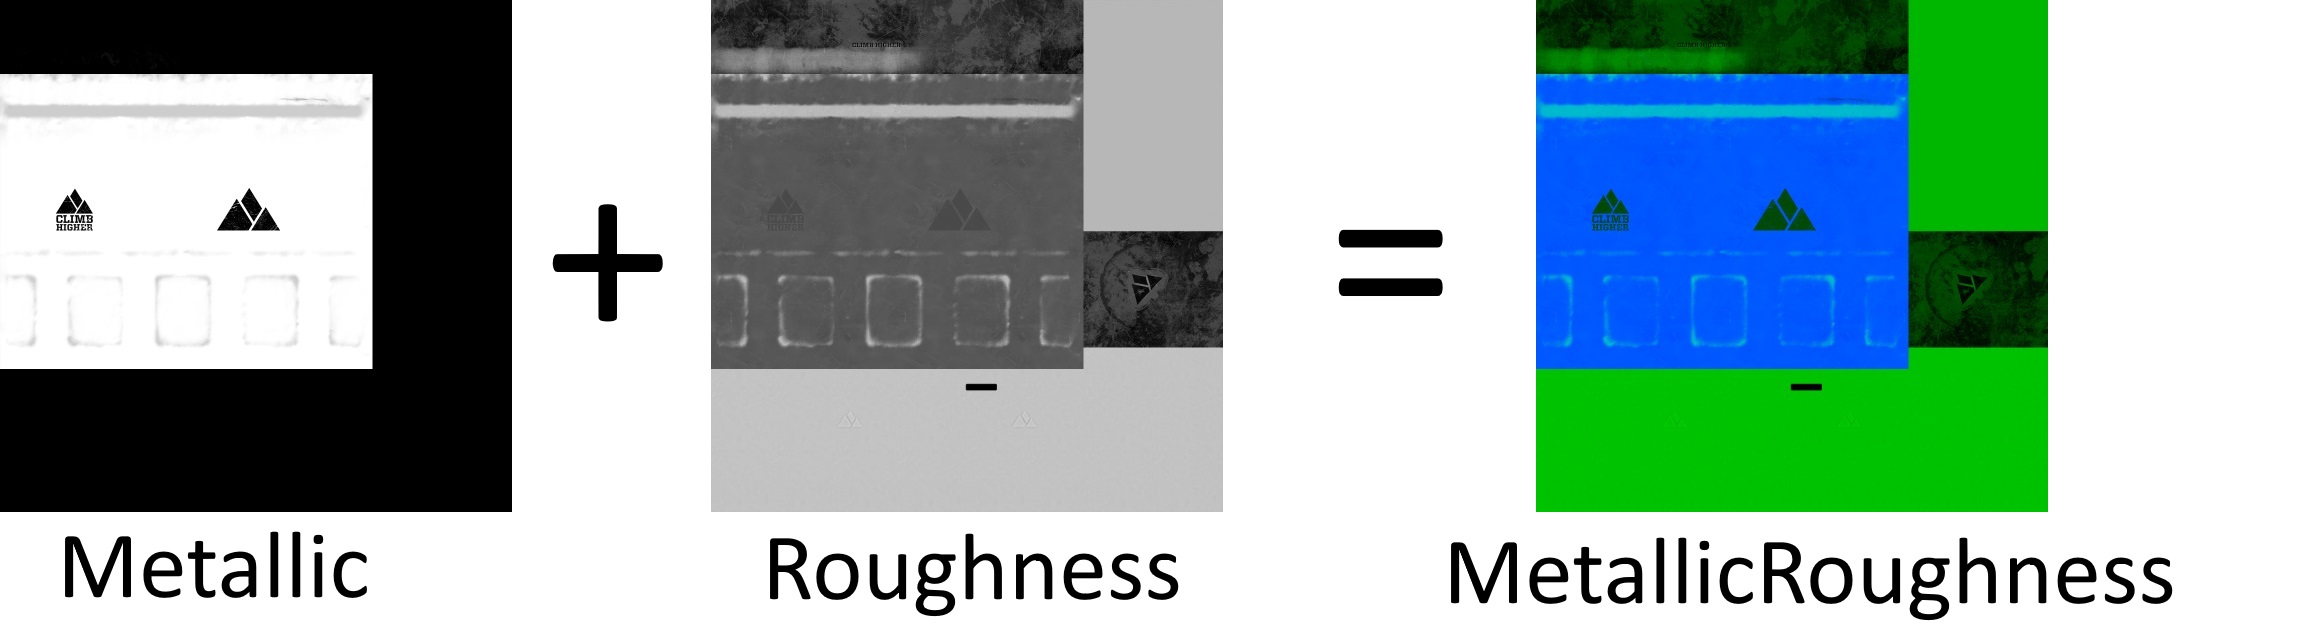 glTF metalness and roughness maps combined